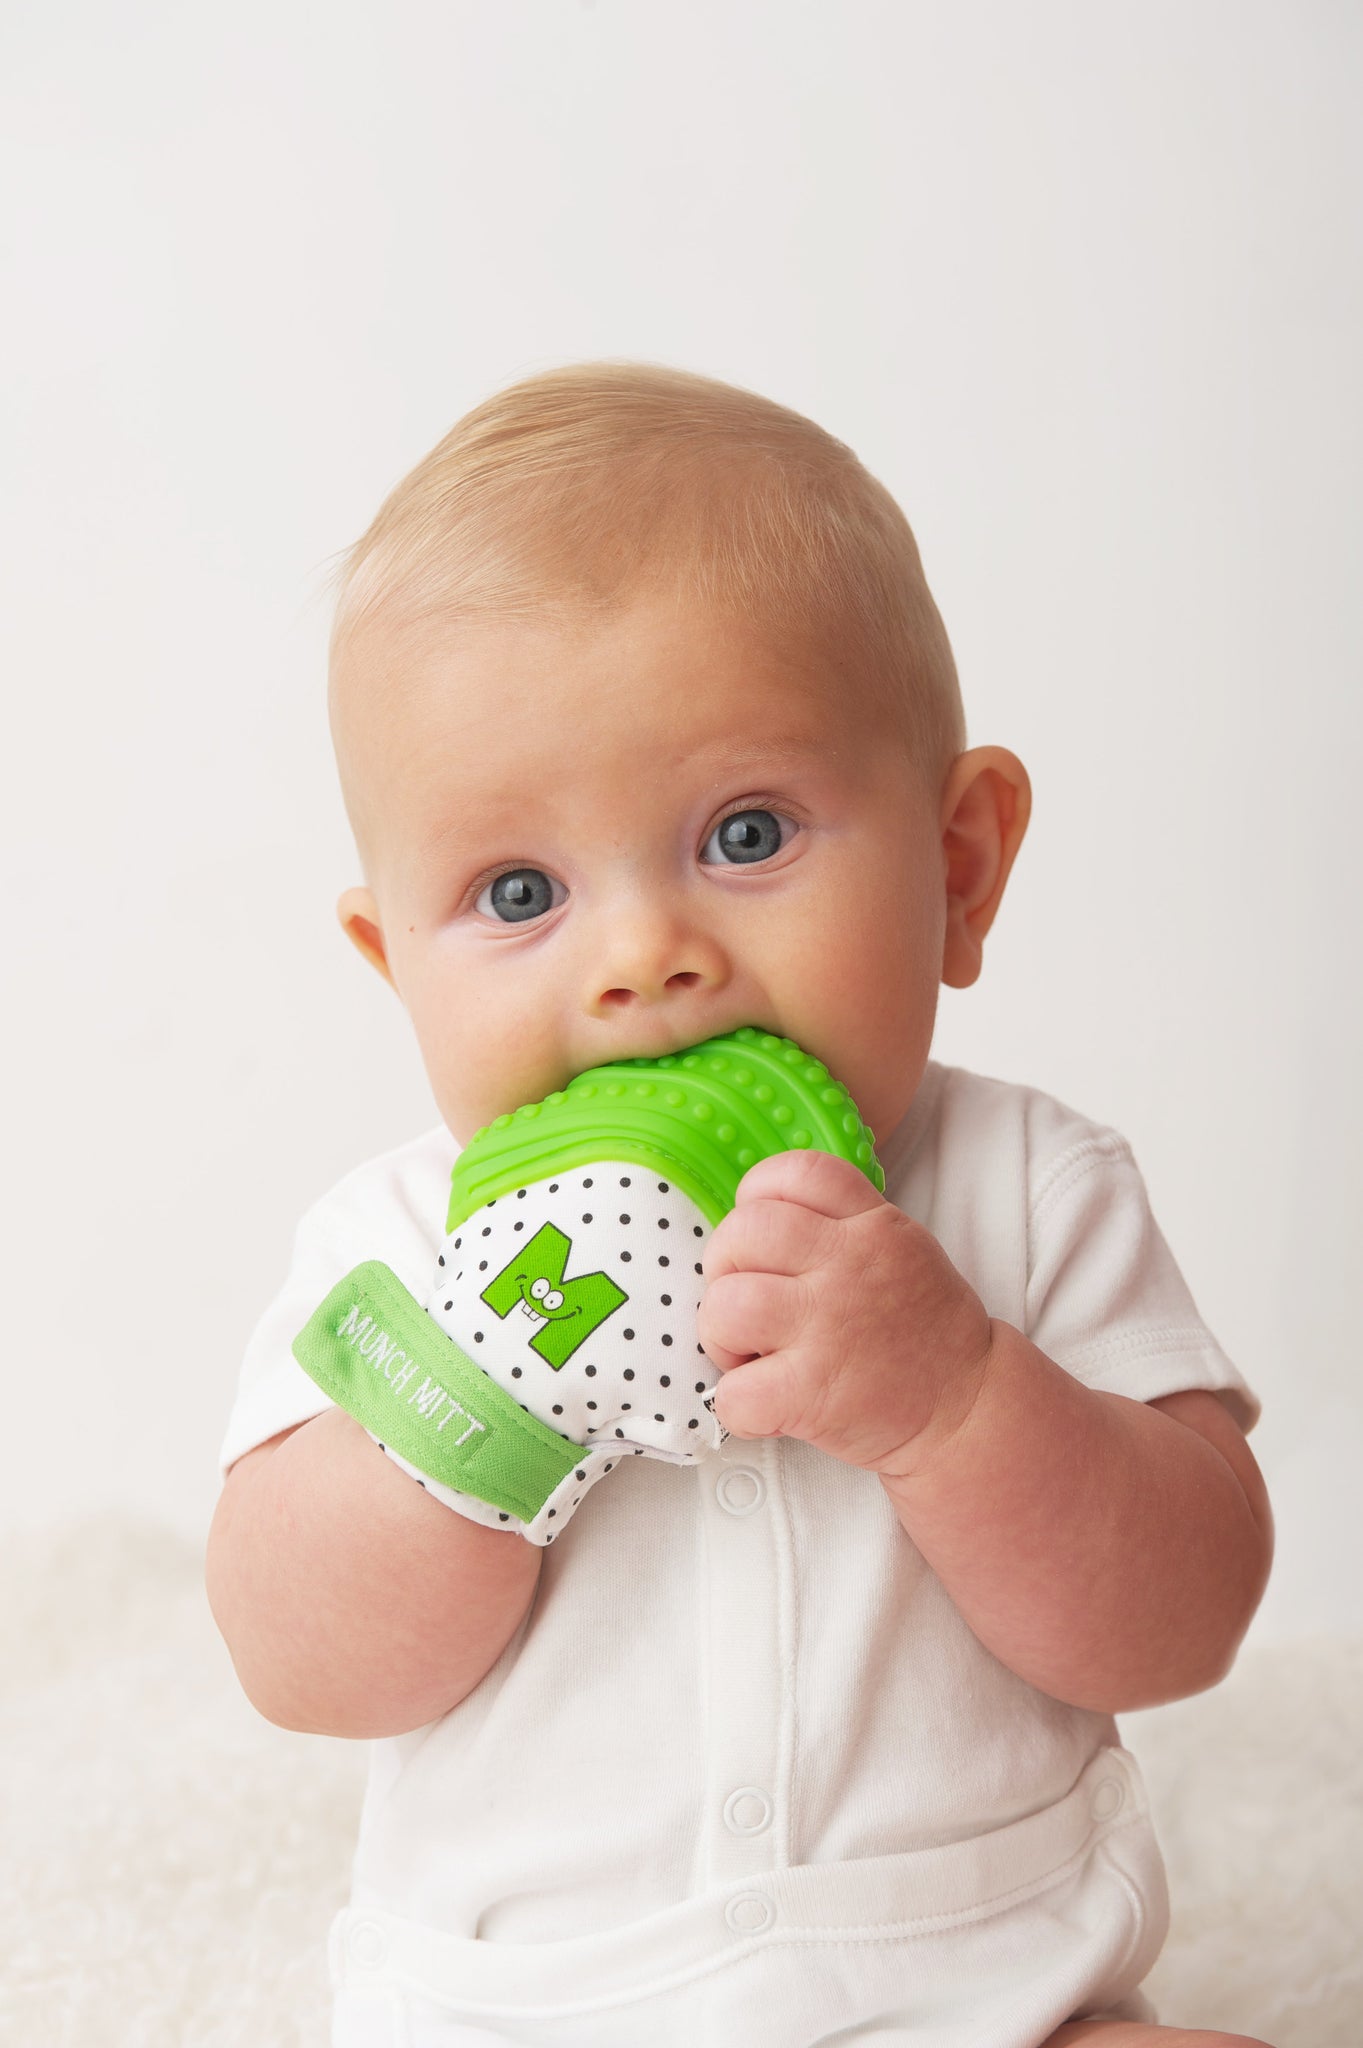 Malarkey Kids - Munch Mitt Natural Teething Products for Baby All Things Being Eco